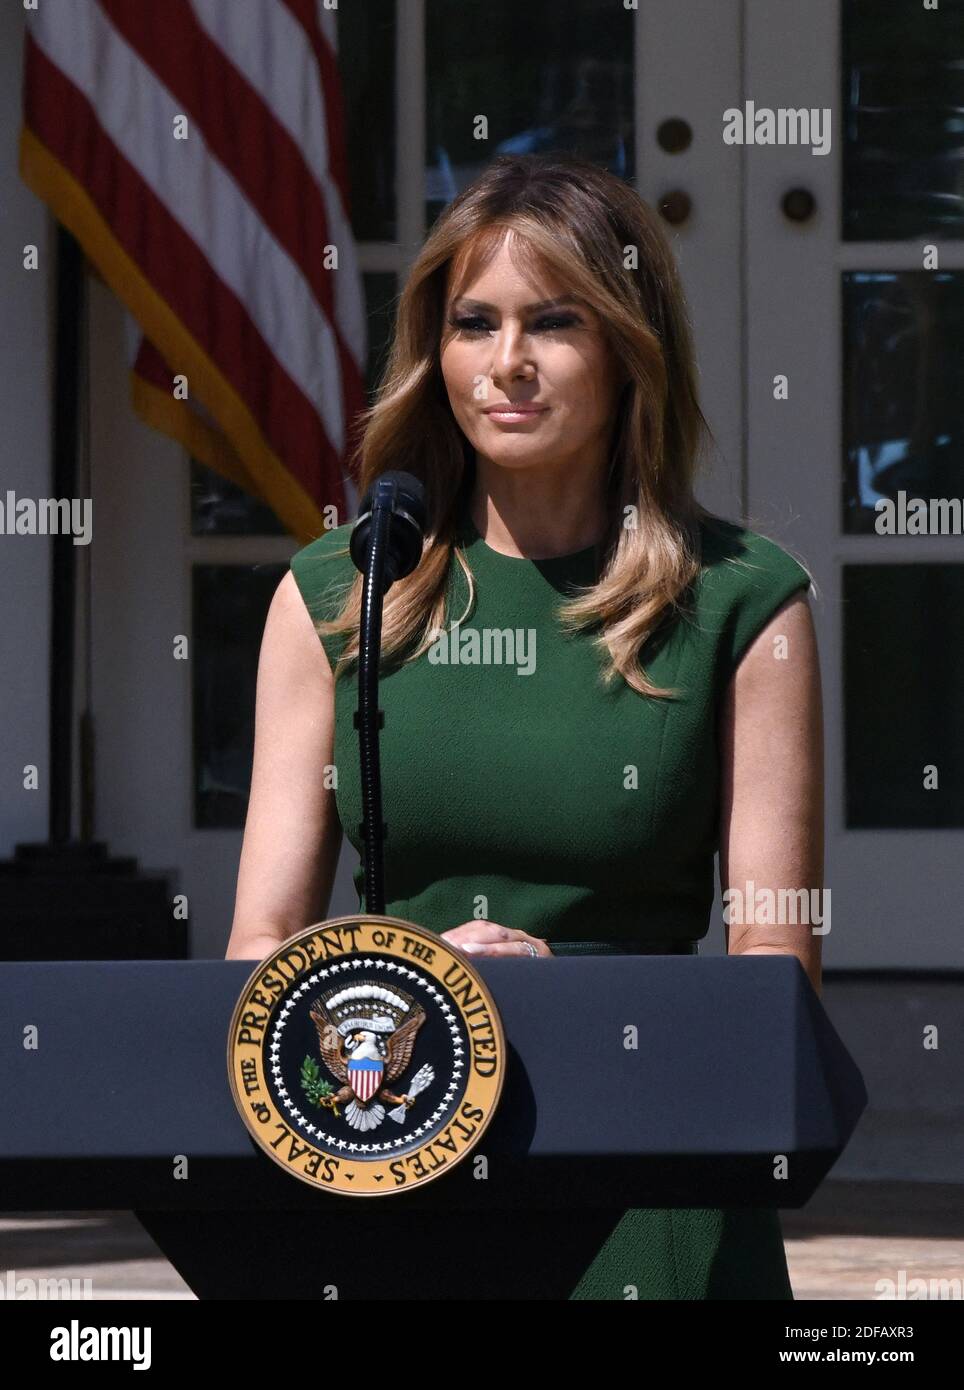 File photo - First lady Melania Trump speaks during the National Day of Prayer Service in the Rose Garden at the White House May 2, 2019 in Washington, DC. A new, scrupulously reported biography by Washington Post reporter Mary Jordan argues that the first lady is not a pawn but a player, an accessory in the second as much as the first sense, and a woman able to get what she wants from one of the most powerful and transparently vain men in the world. The book is called The Art of Her Deal. Photo by Olivier Douliery/ABACAPRESS.COM Stock Photo